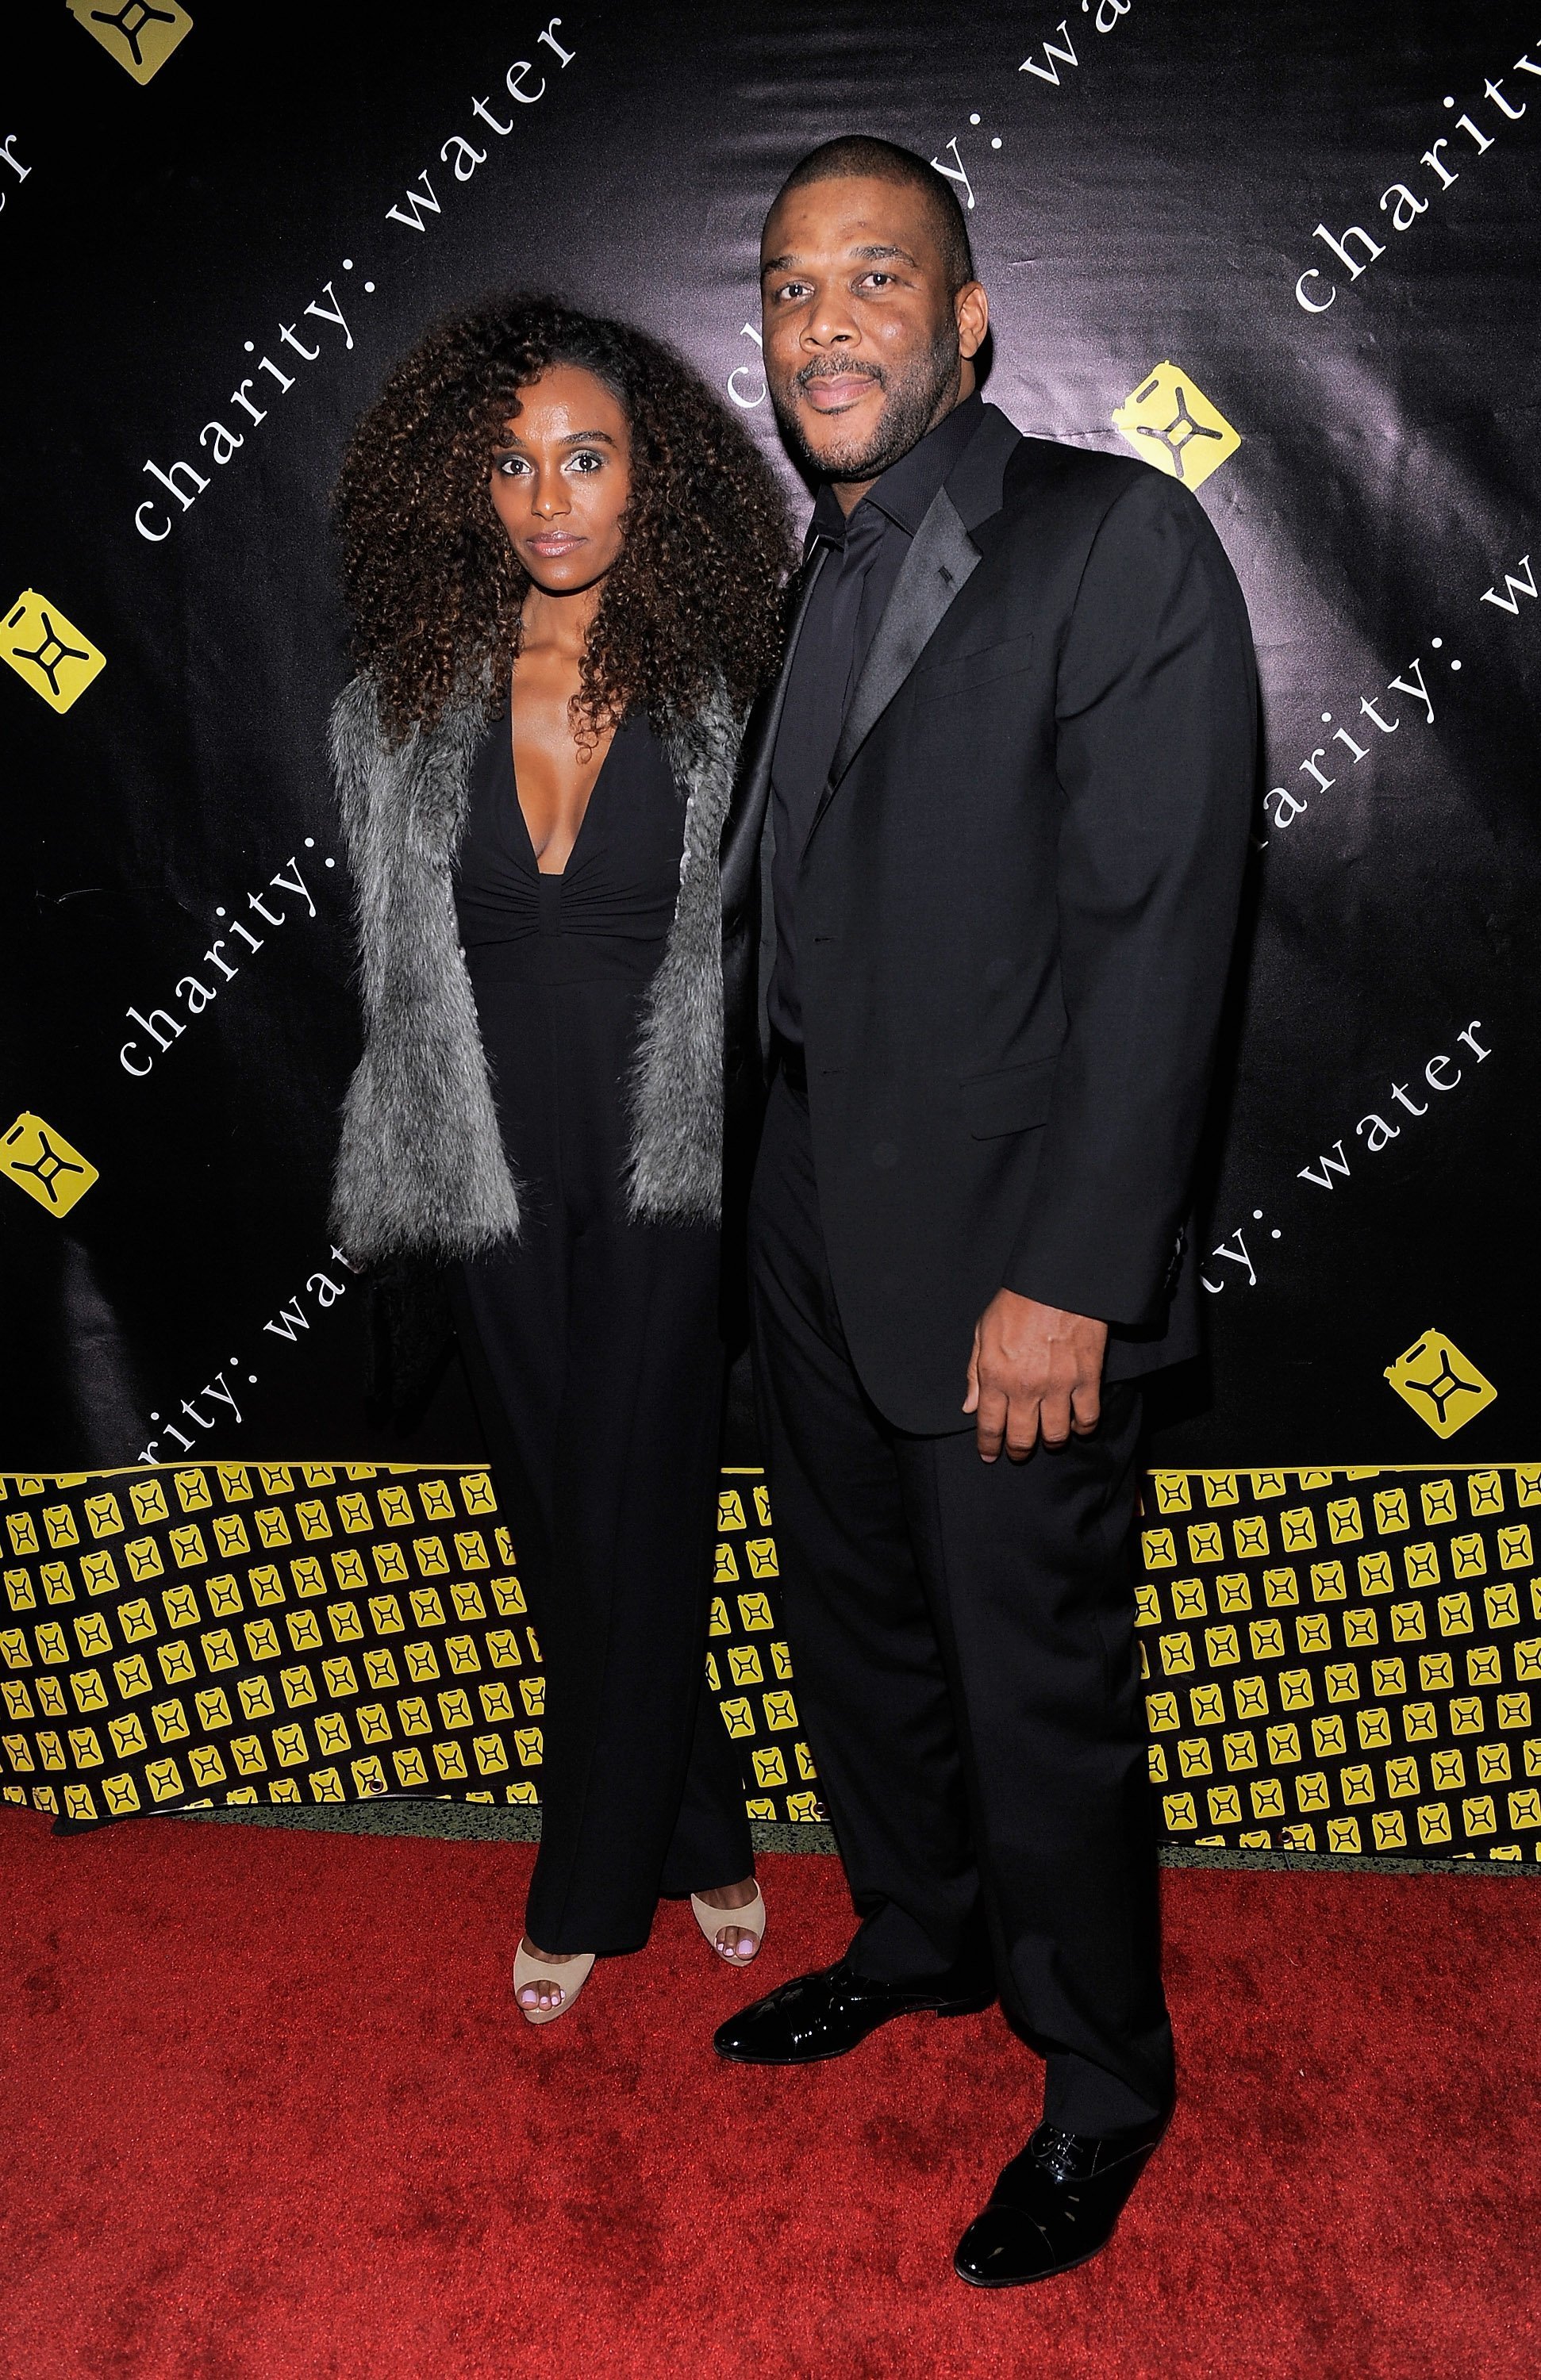 Gelila Bekele and Tyler Perry at the 6th Annual Charity Ball benefiting Charity Water. 2011. | Photo: GettyImages